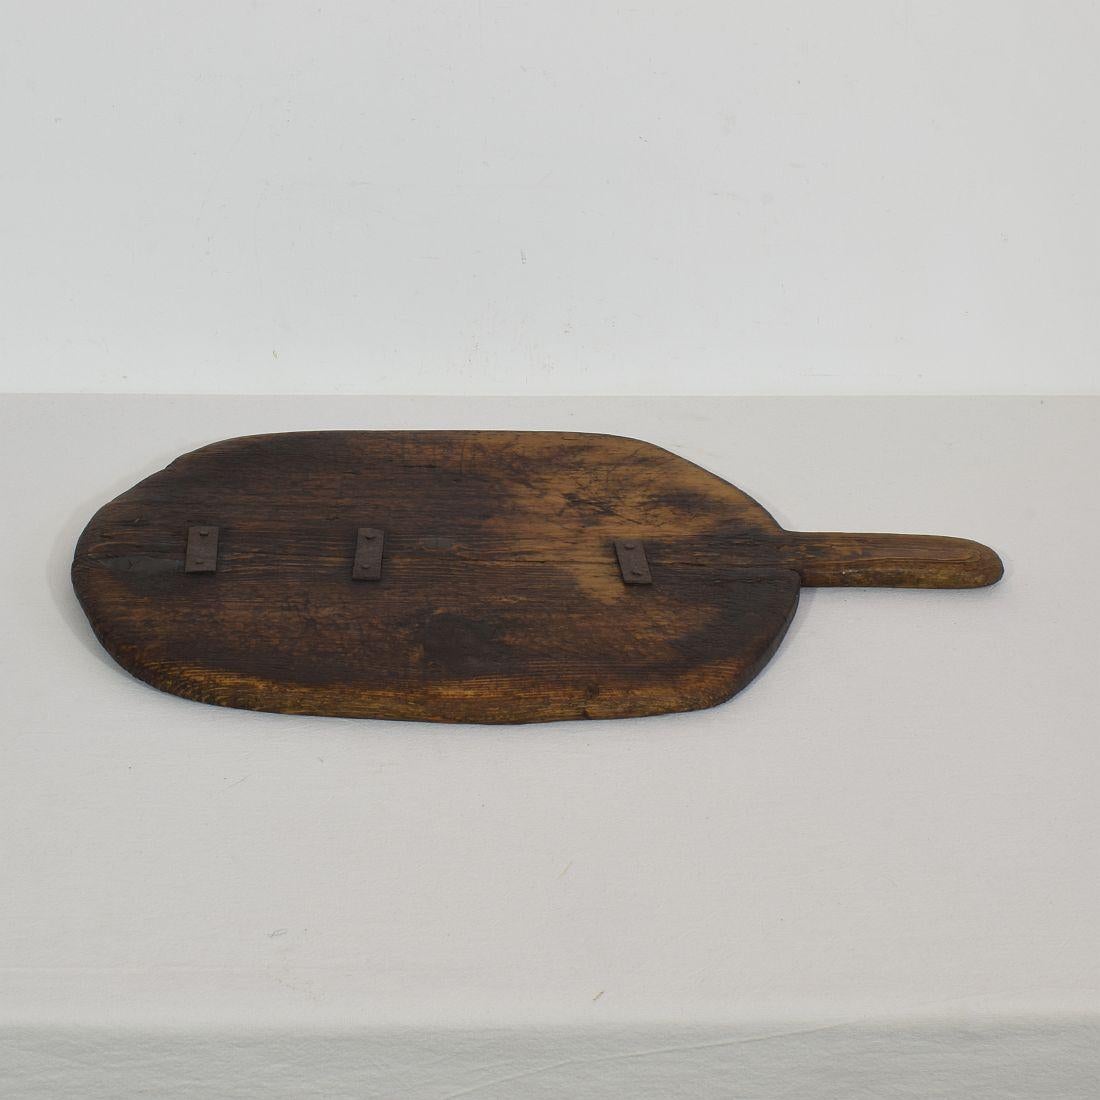 French Provincial French 19th Century, Wooden Chopping or Cutting Board